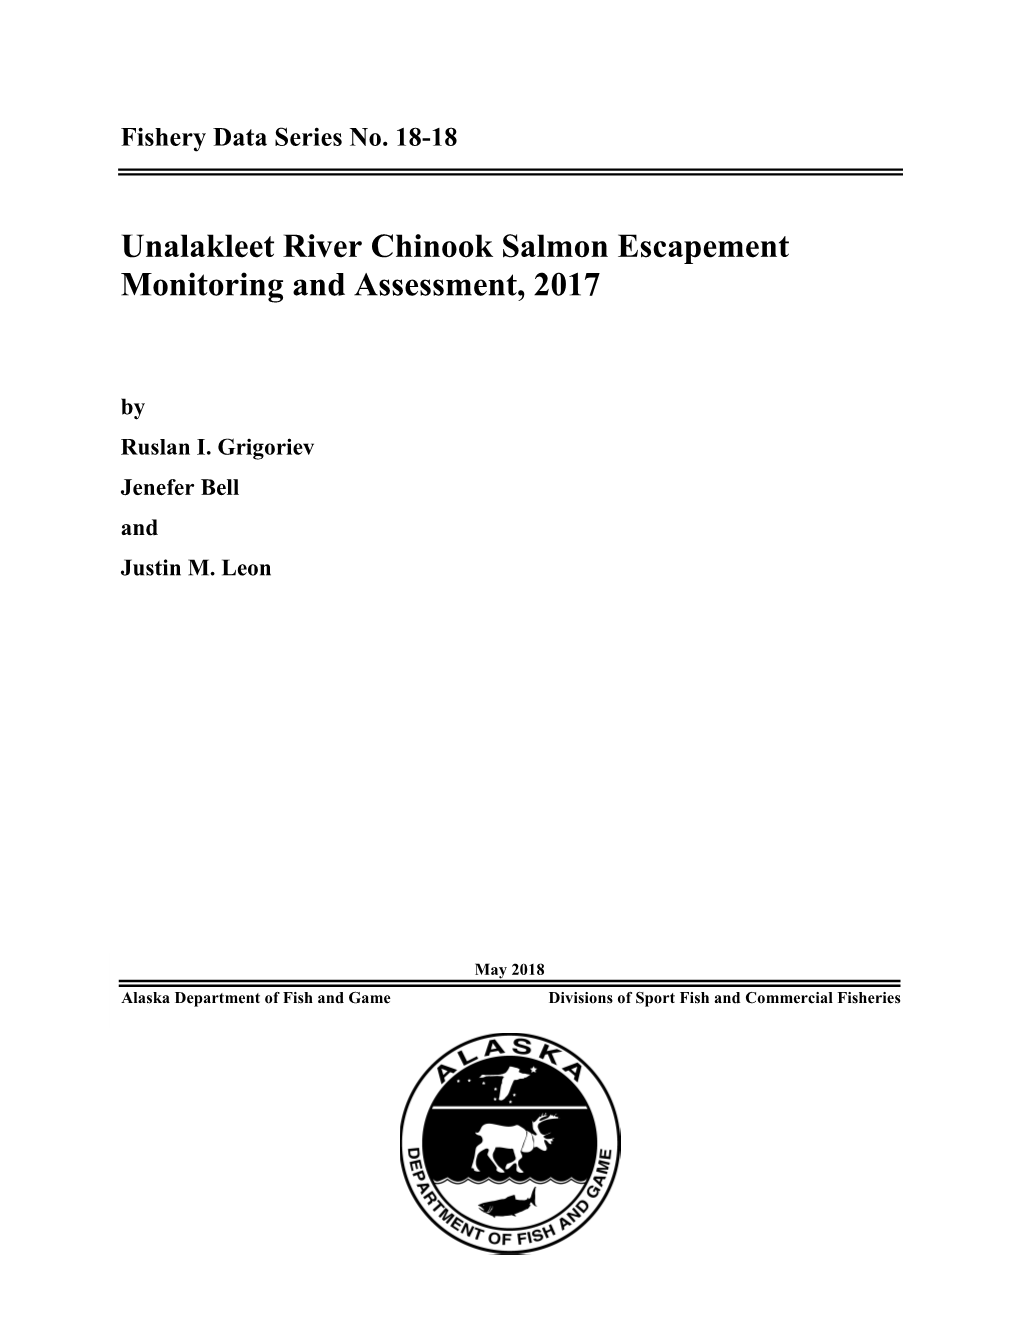 Unalakleet River Chinook Salmon Escapement Monitoring and Assessment, 2017. Alaska Department of Fish and Game, Fishery Data Series No